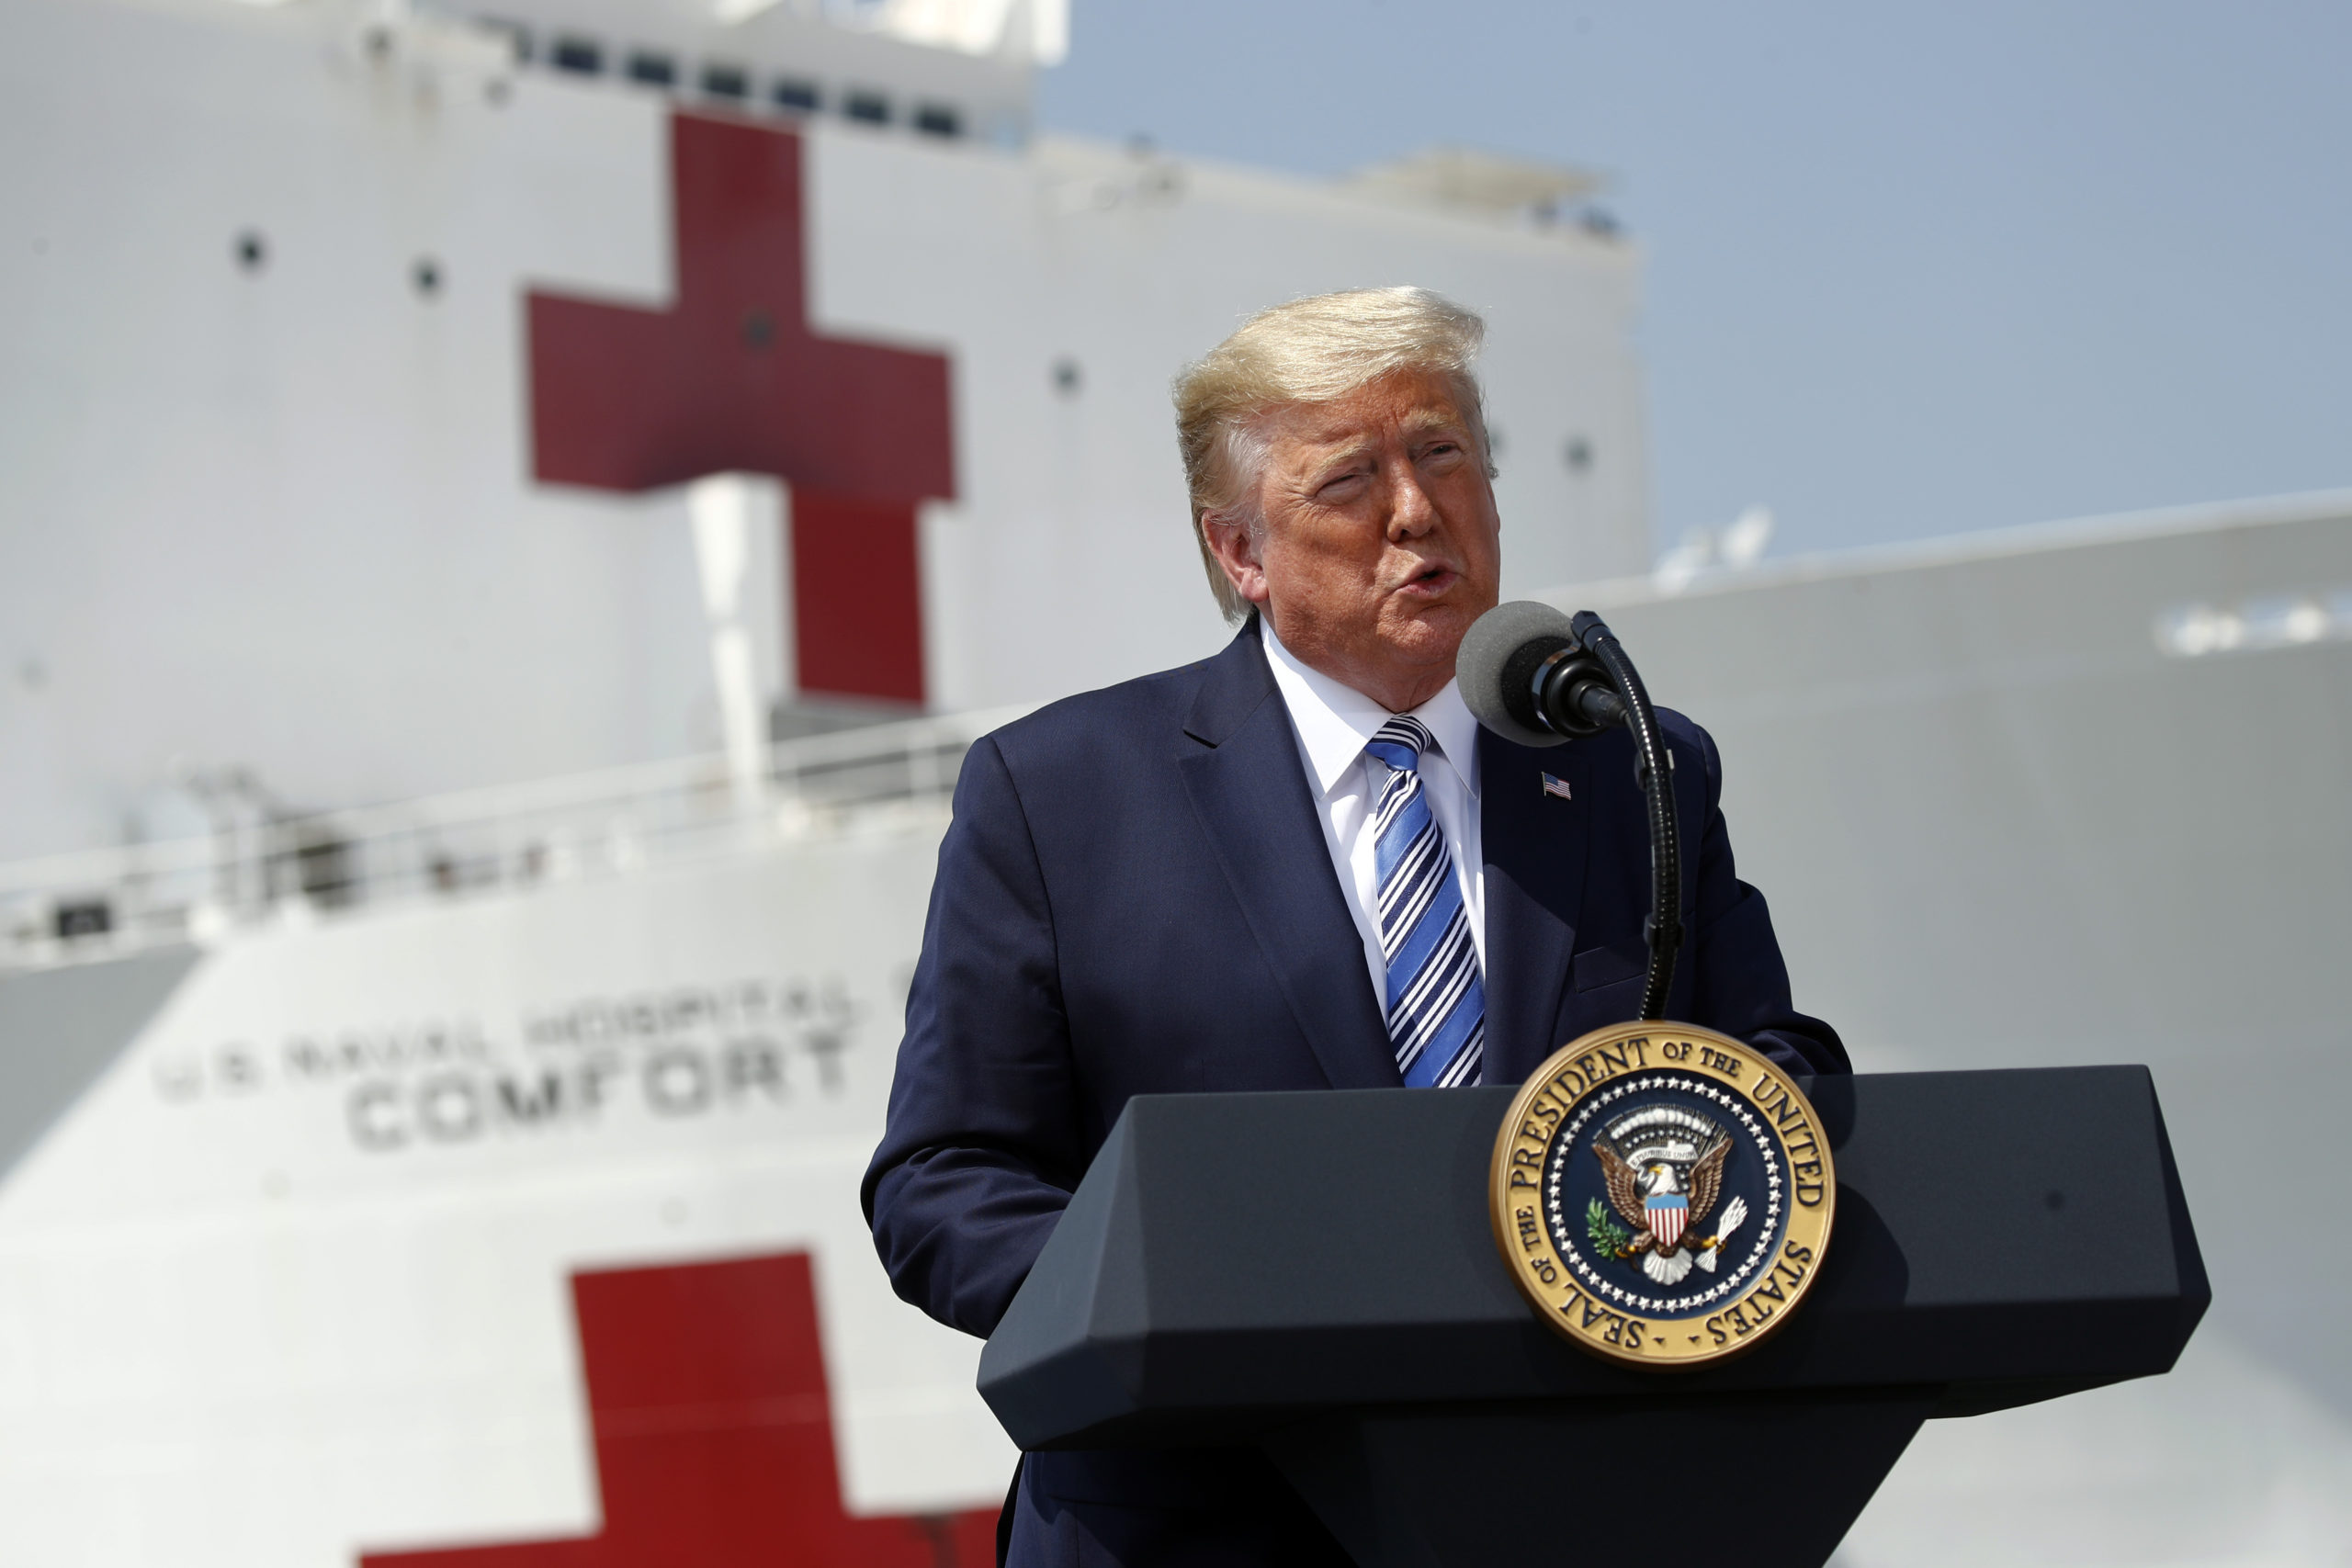 President Donald Trump speaks in front of the U.S. Navy hospital ship USNS Comfort at Naval Station Norfolk in Norfolk, Va., Saturday, March 28, 2020. The ship is departing for New York to assist hospitals responding to the coronavirus outbreak. (AP Photo/Patrick Semansky)